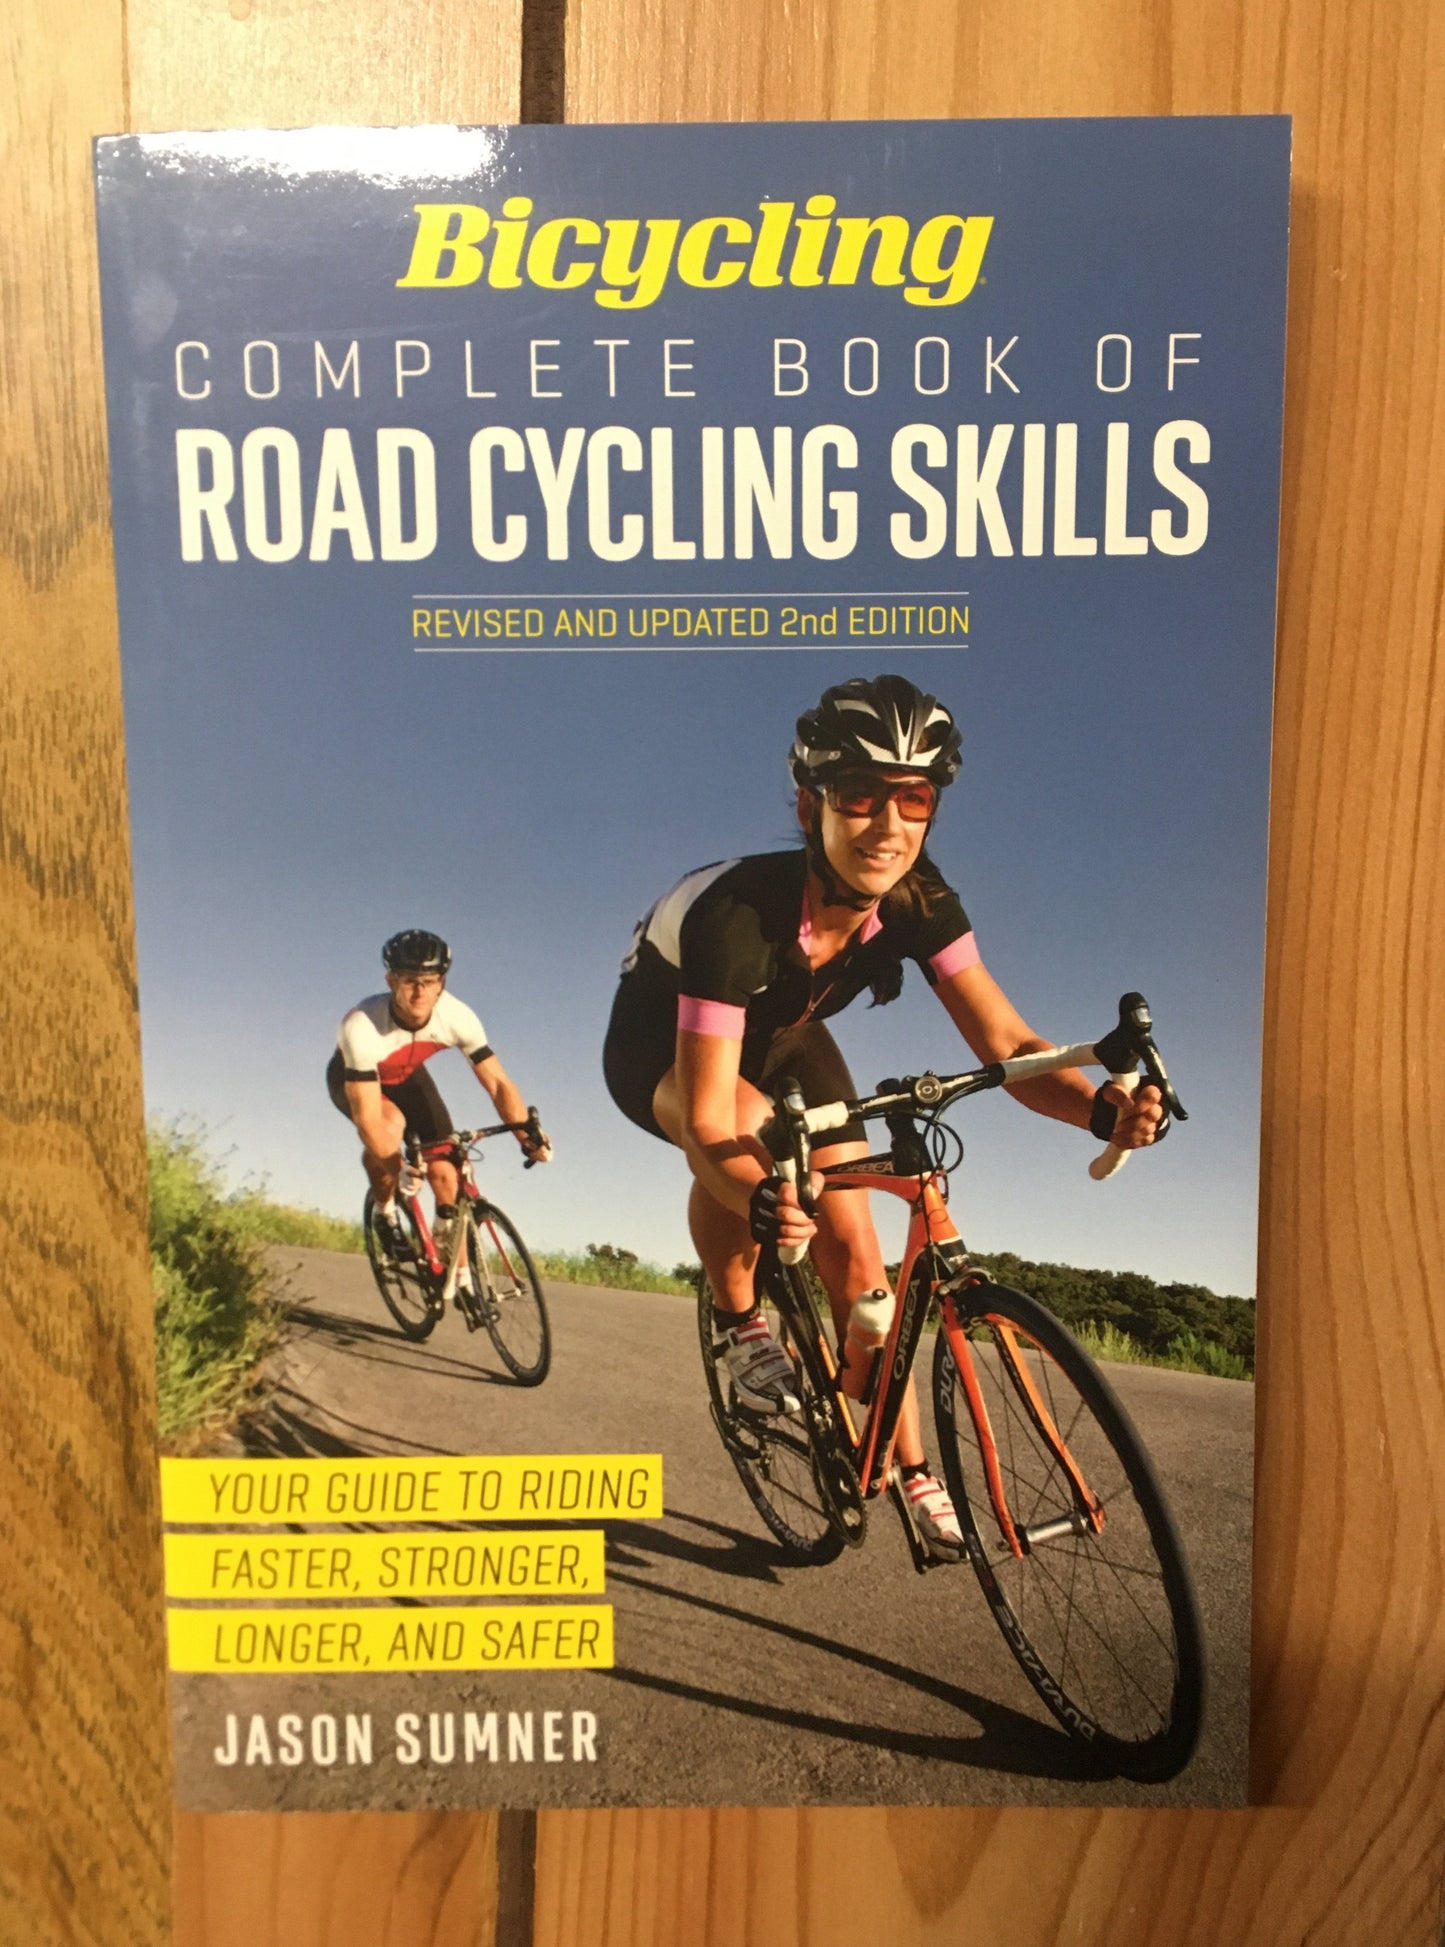 Bicycling Complete Book of Road Cycling Skills 2nd Edition